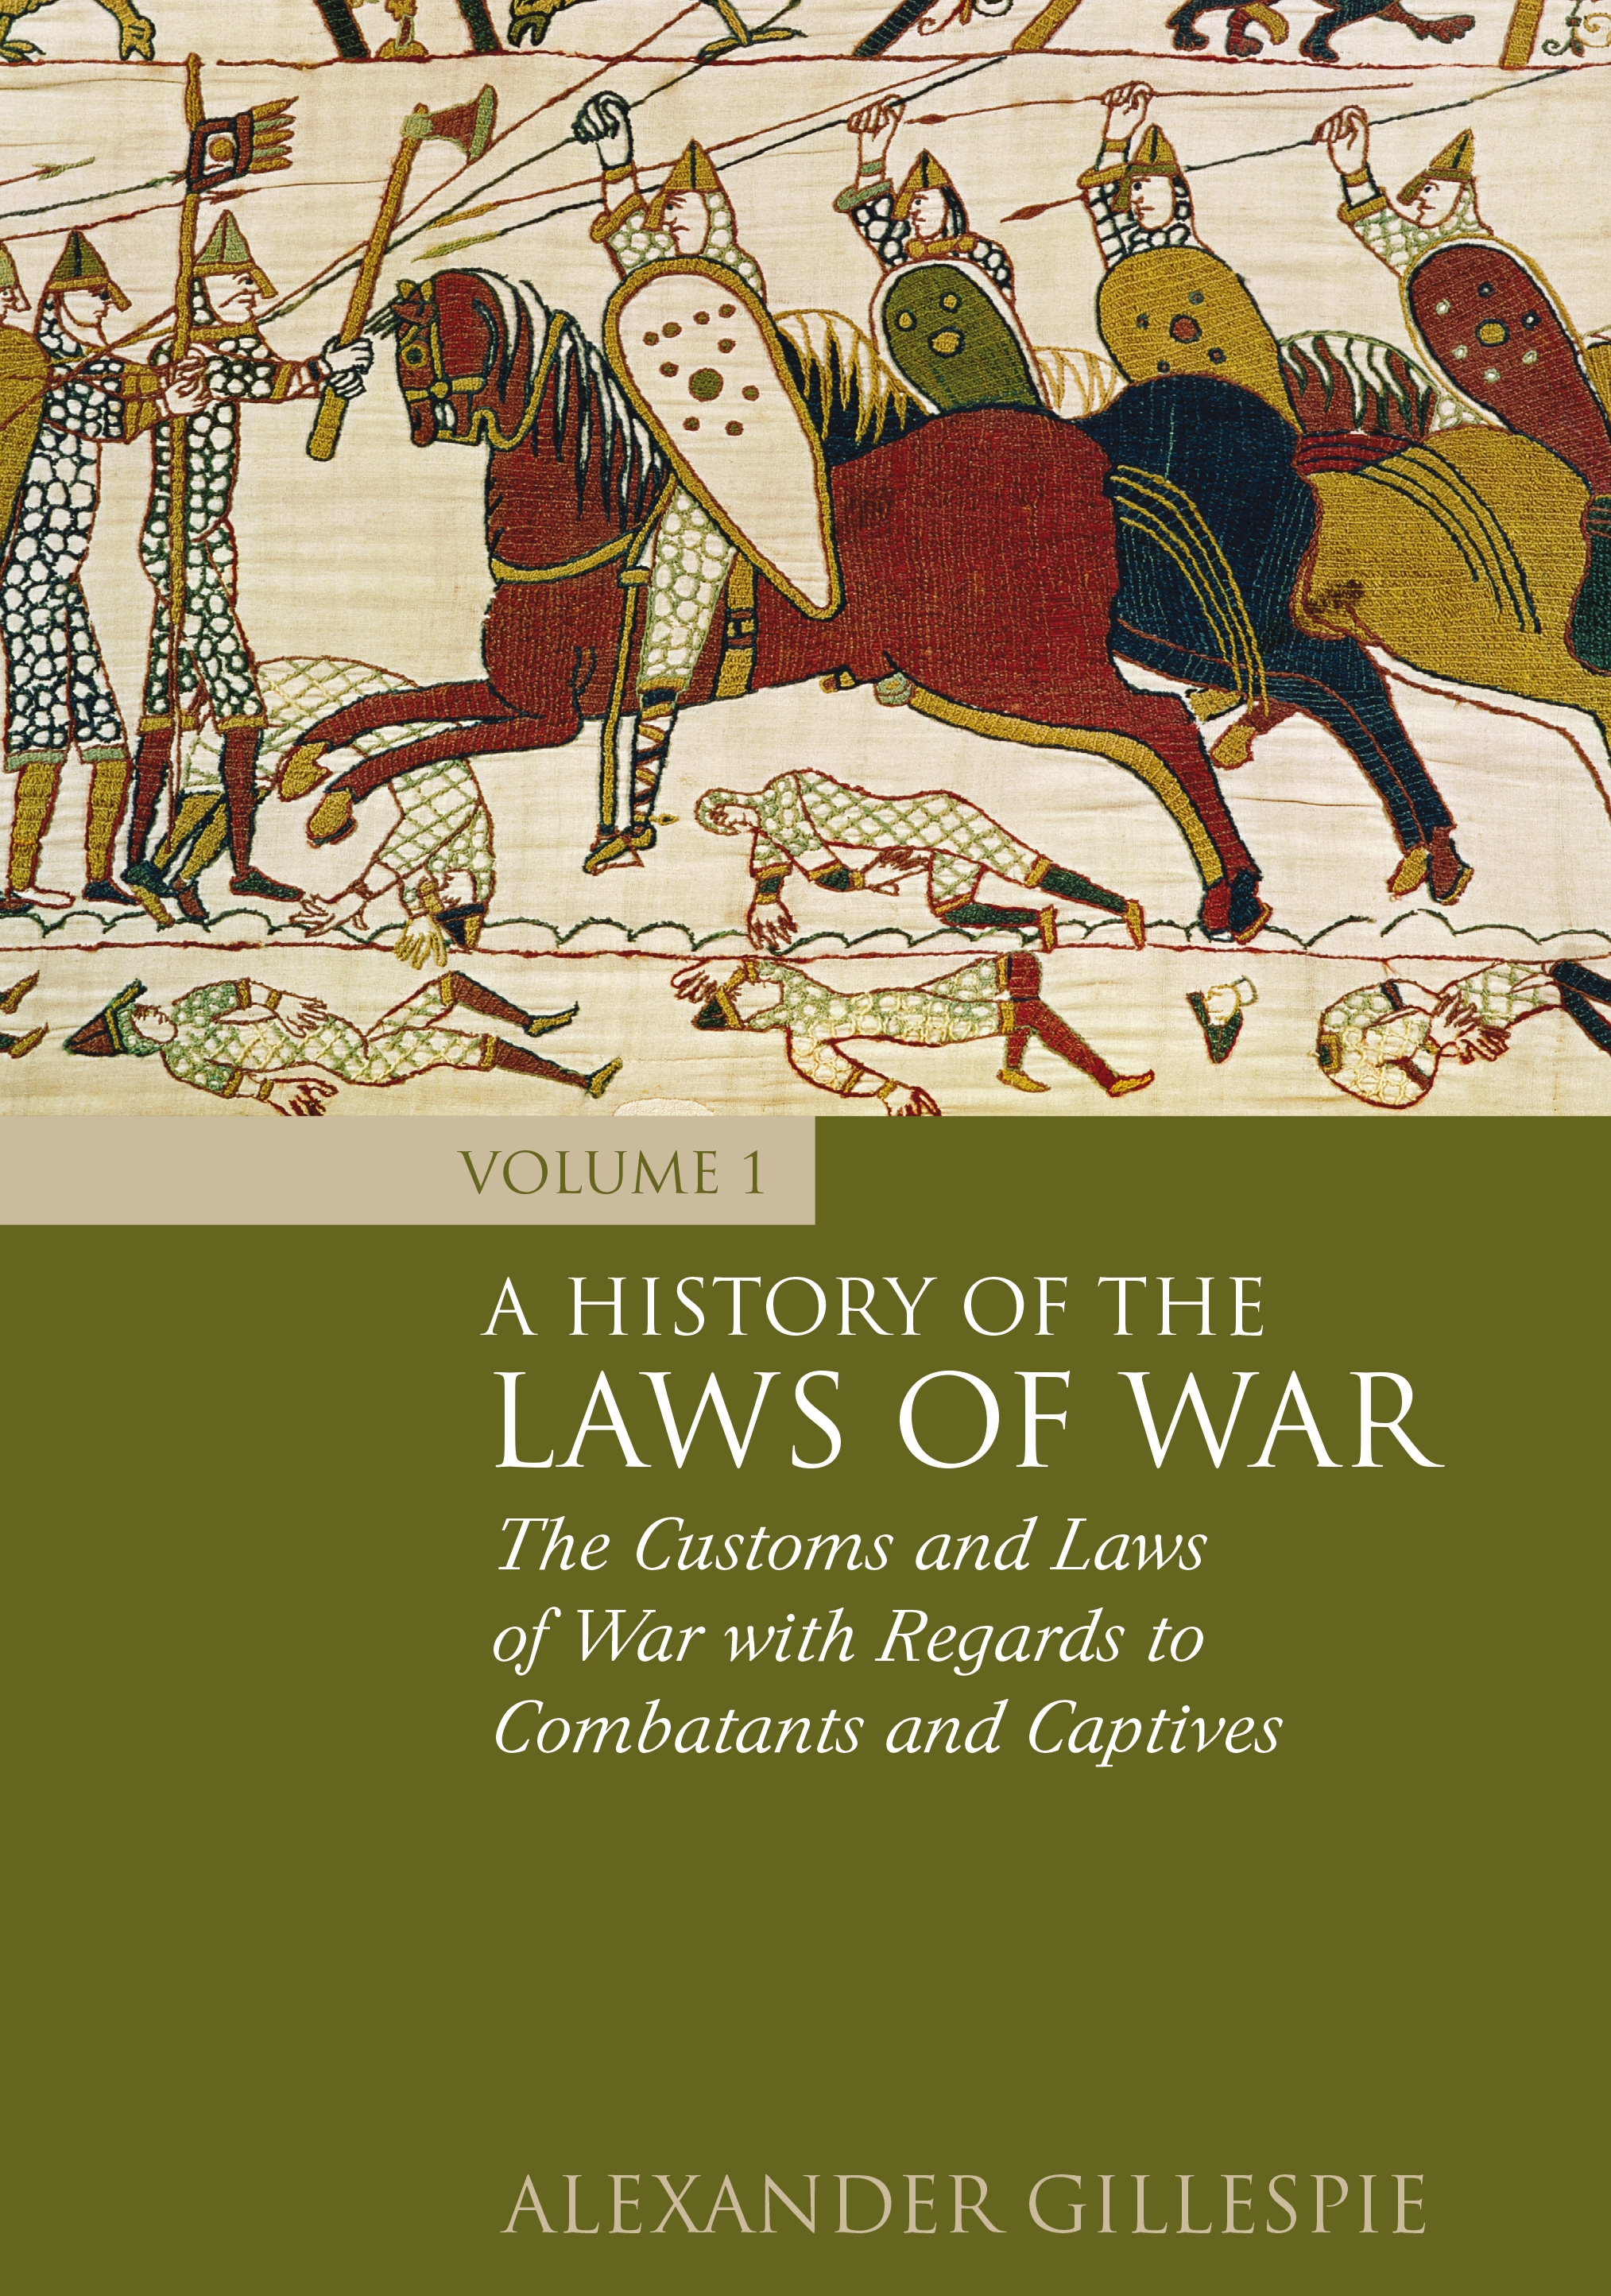 A History of the Laws of War - 50-99.99